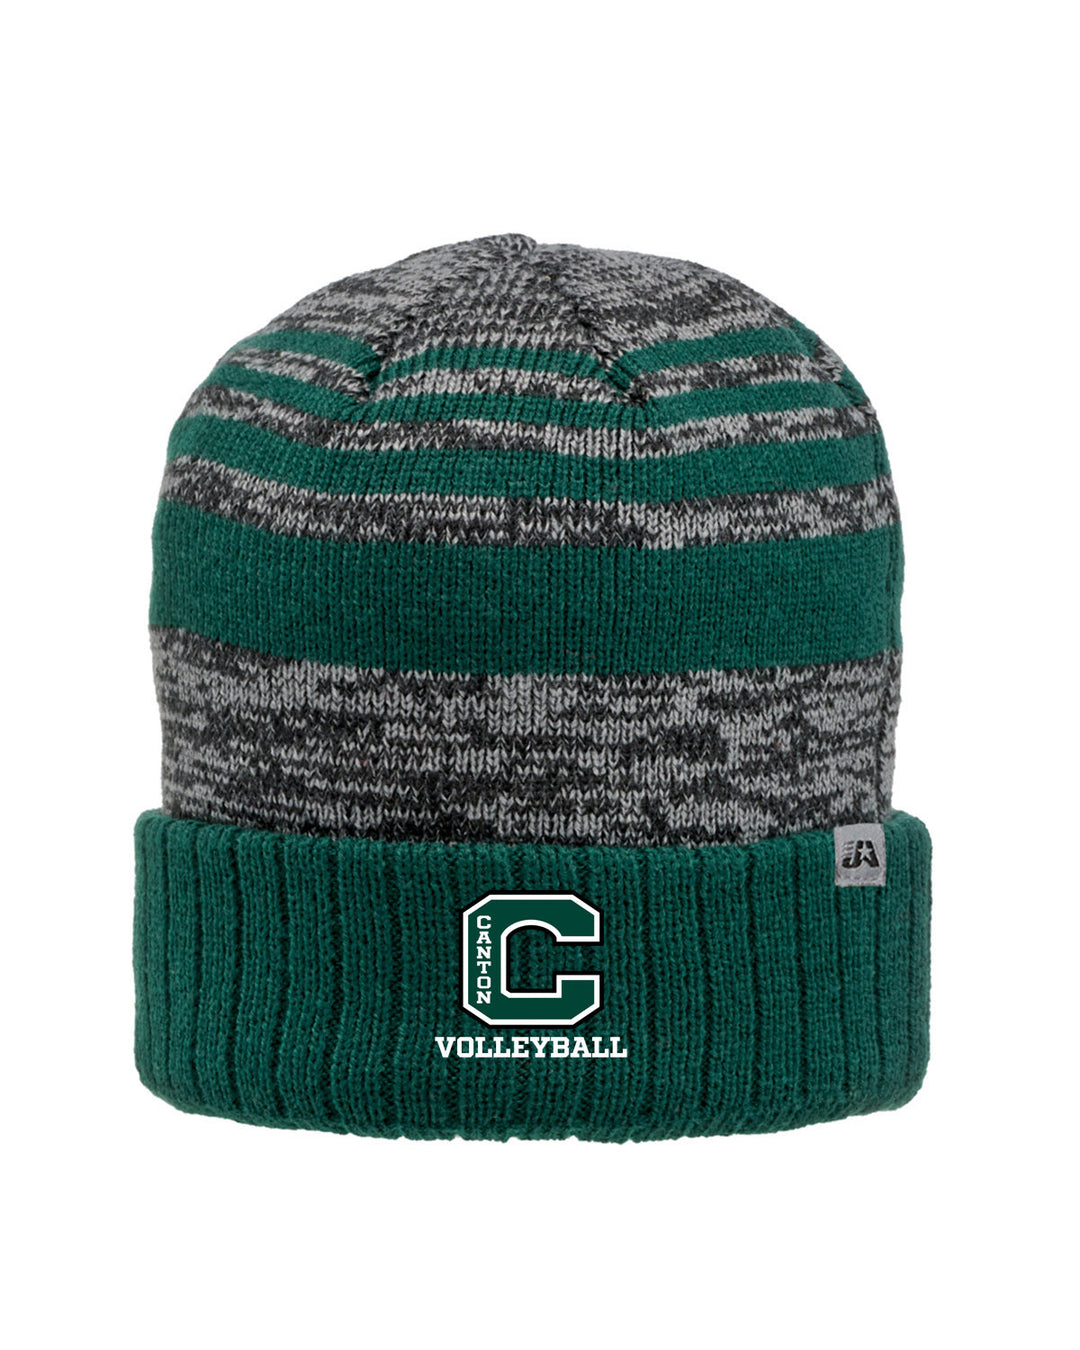 Canton Volleyball Knit Hat (TW5000)